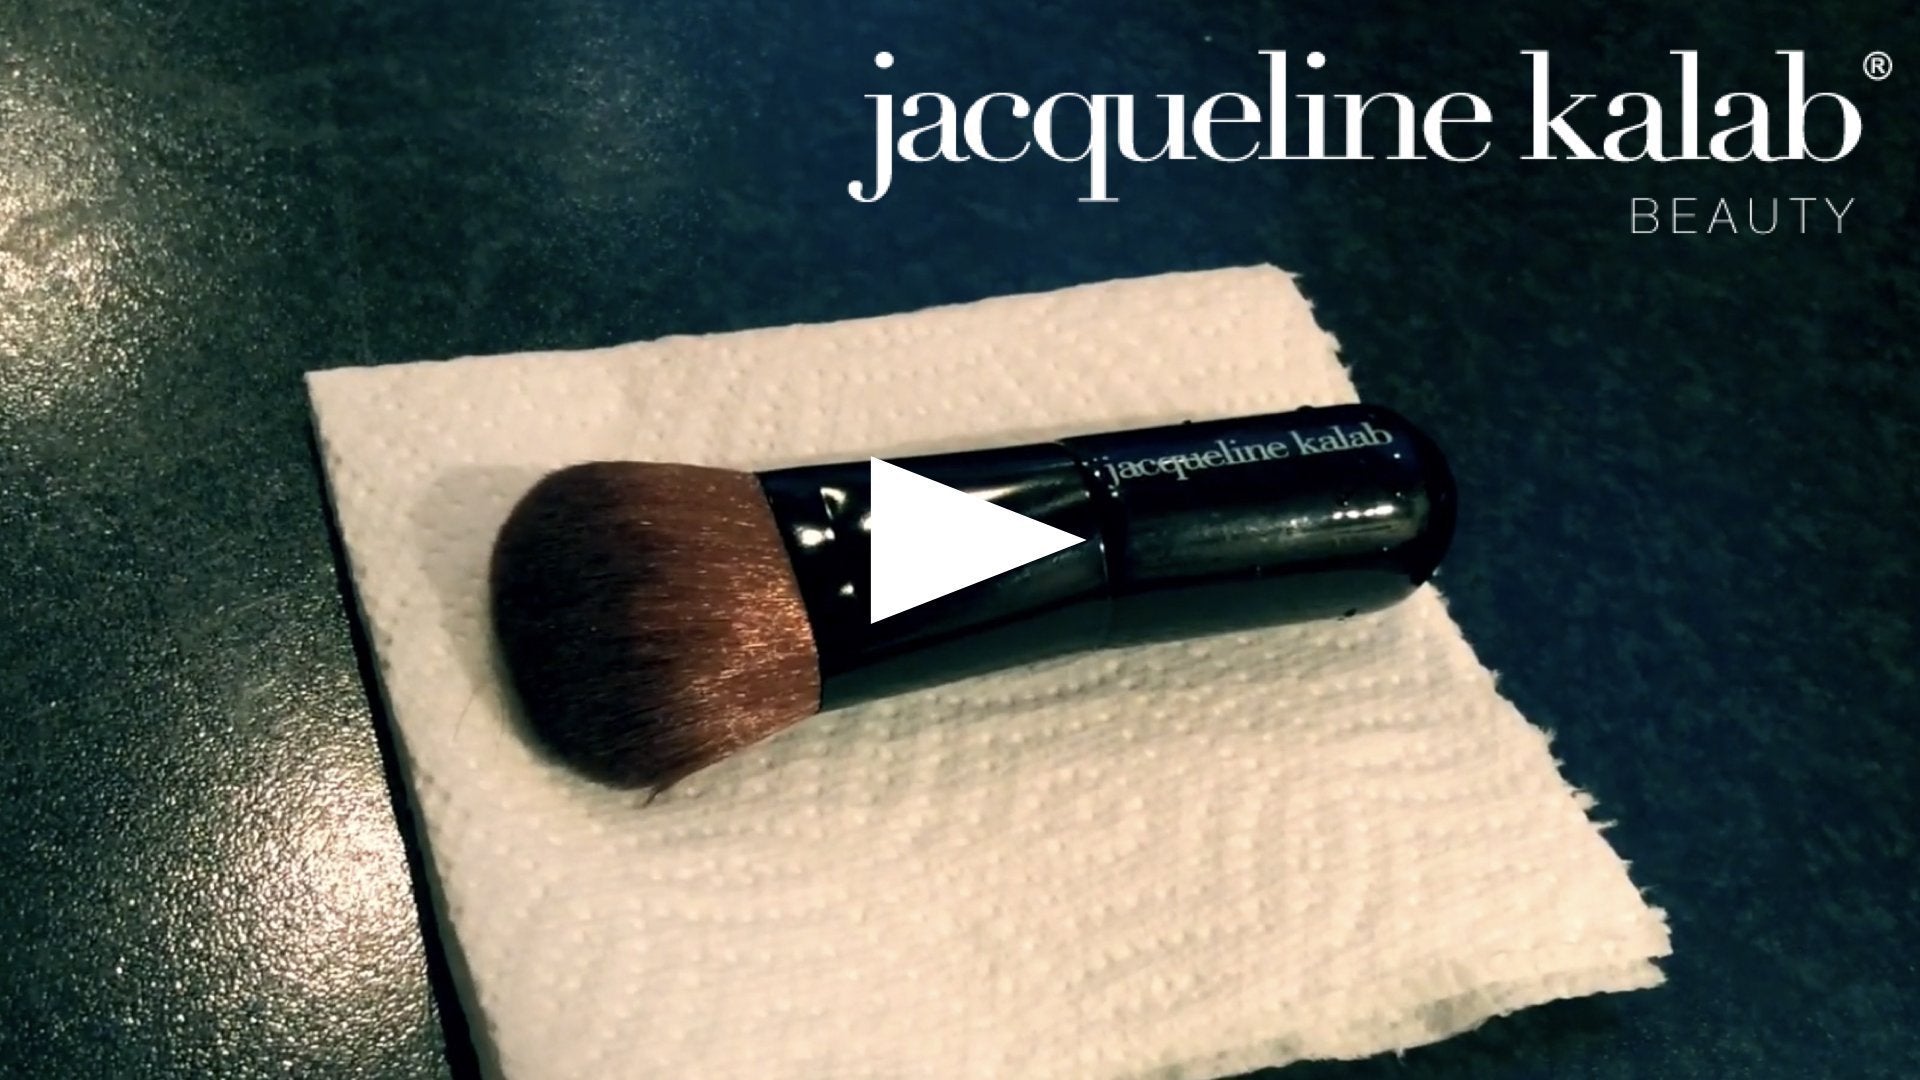 How to Clean Makeup Brushes | Jacqueline Kalab Beauty